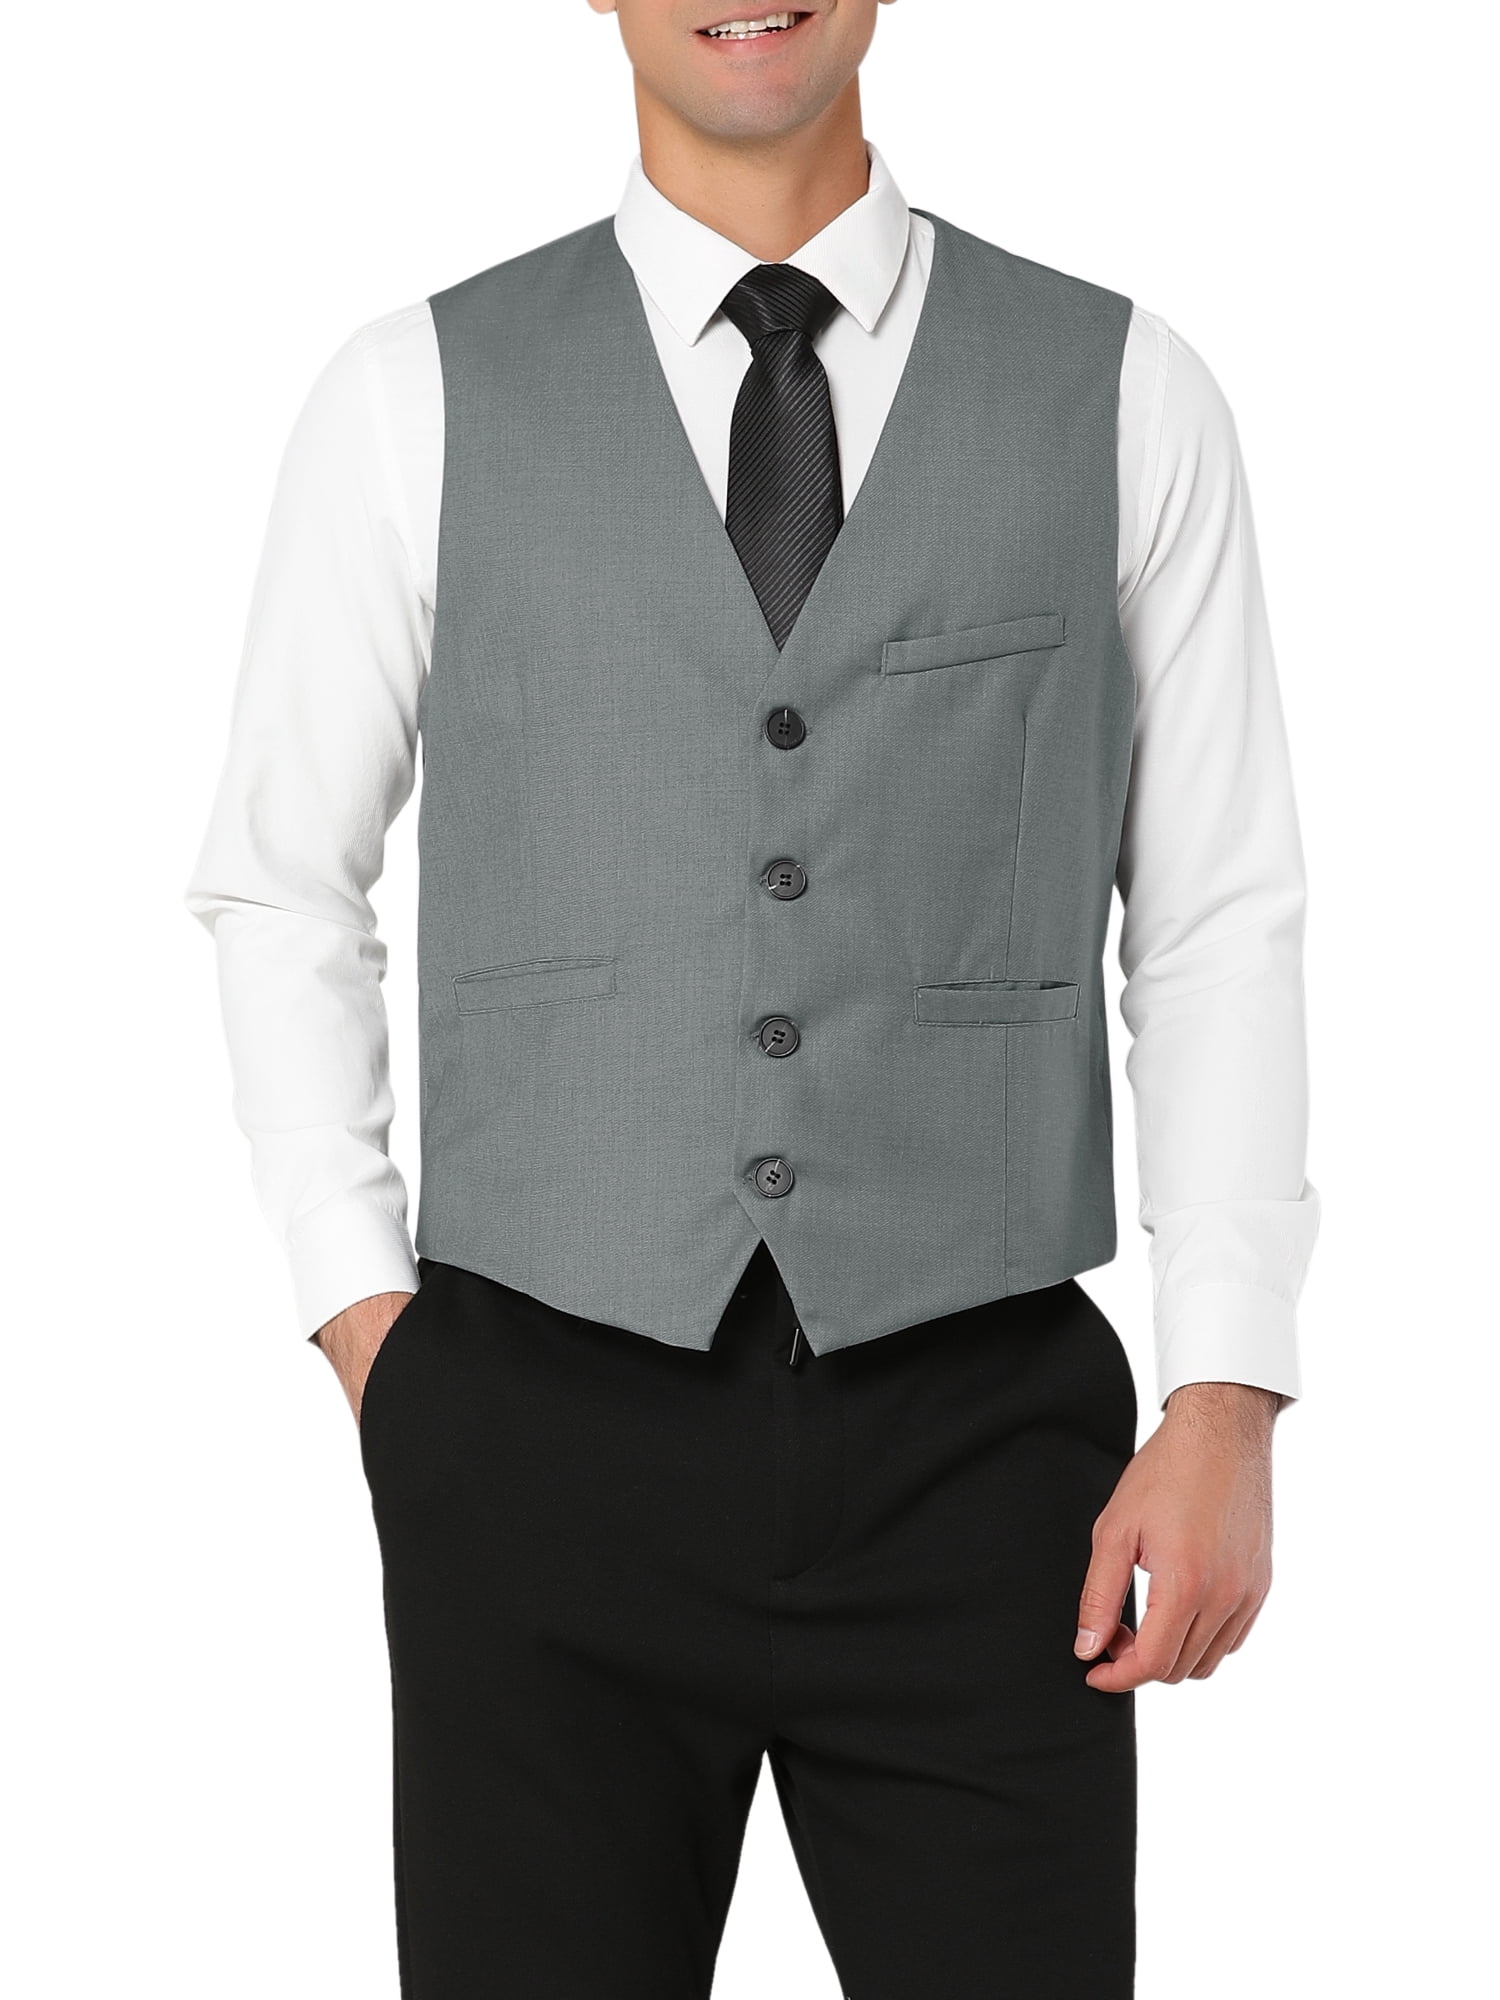 W PARTY 580  MENS/BOYS SILVER VERTICAL WAVES WAISTCOAT FORMAL SUIT 